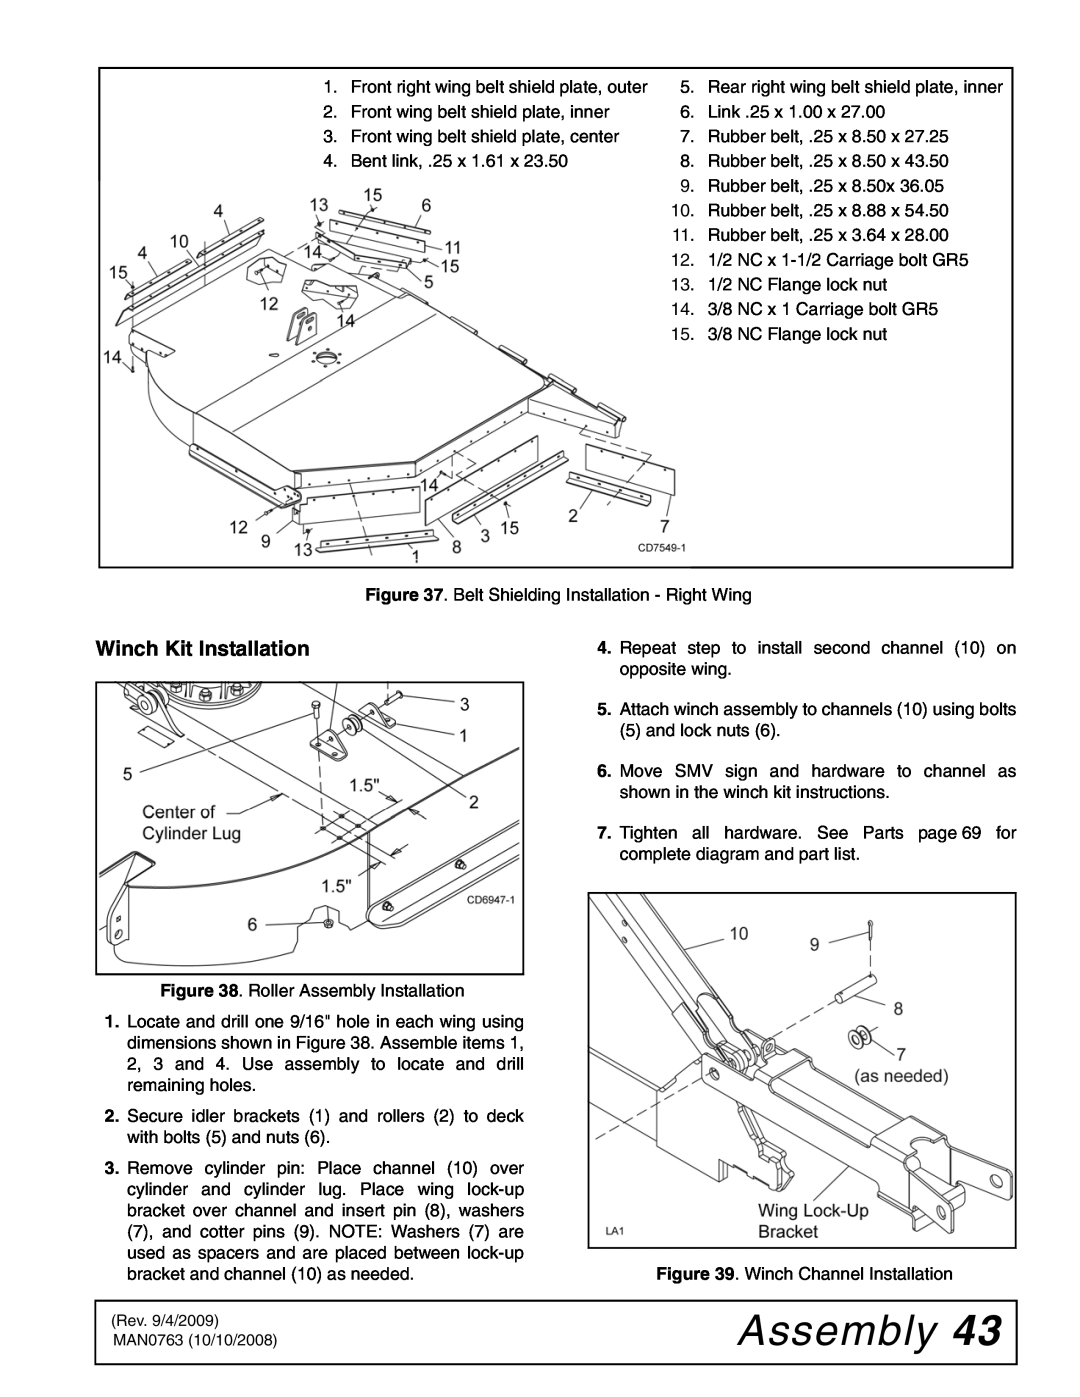 Woods Equipment BW240HDQ manual Assembly, Winch Kit Installation 